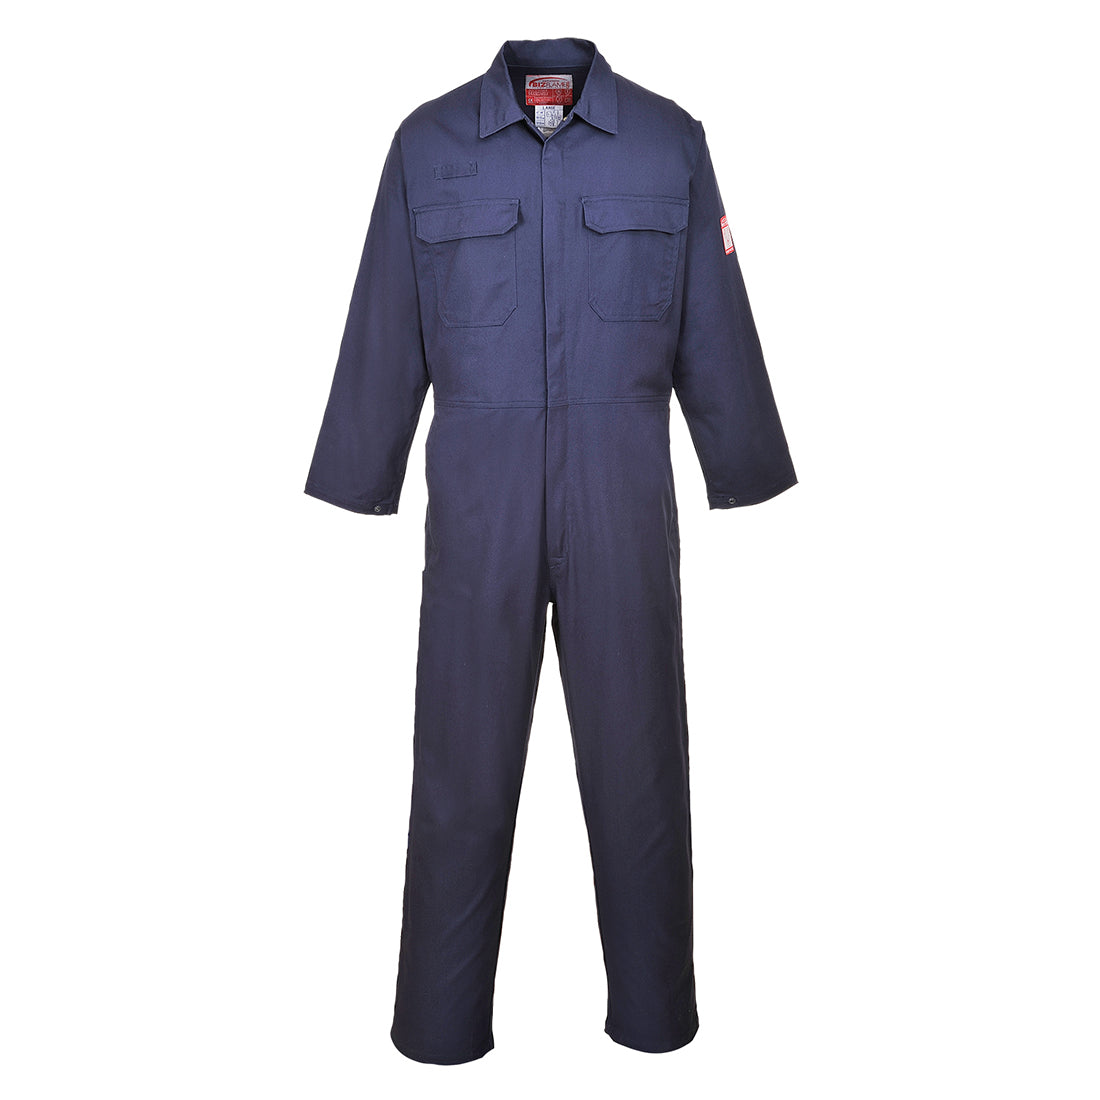 Bizflame Pro Coverall